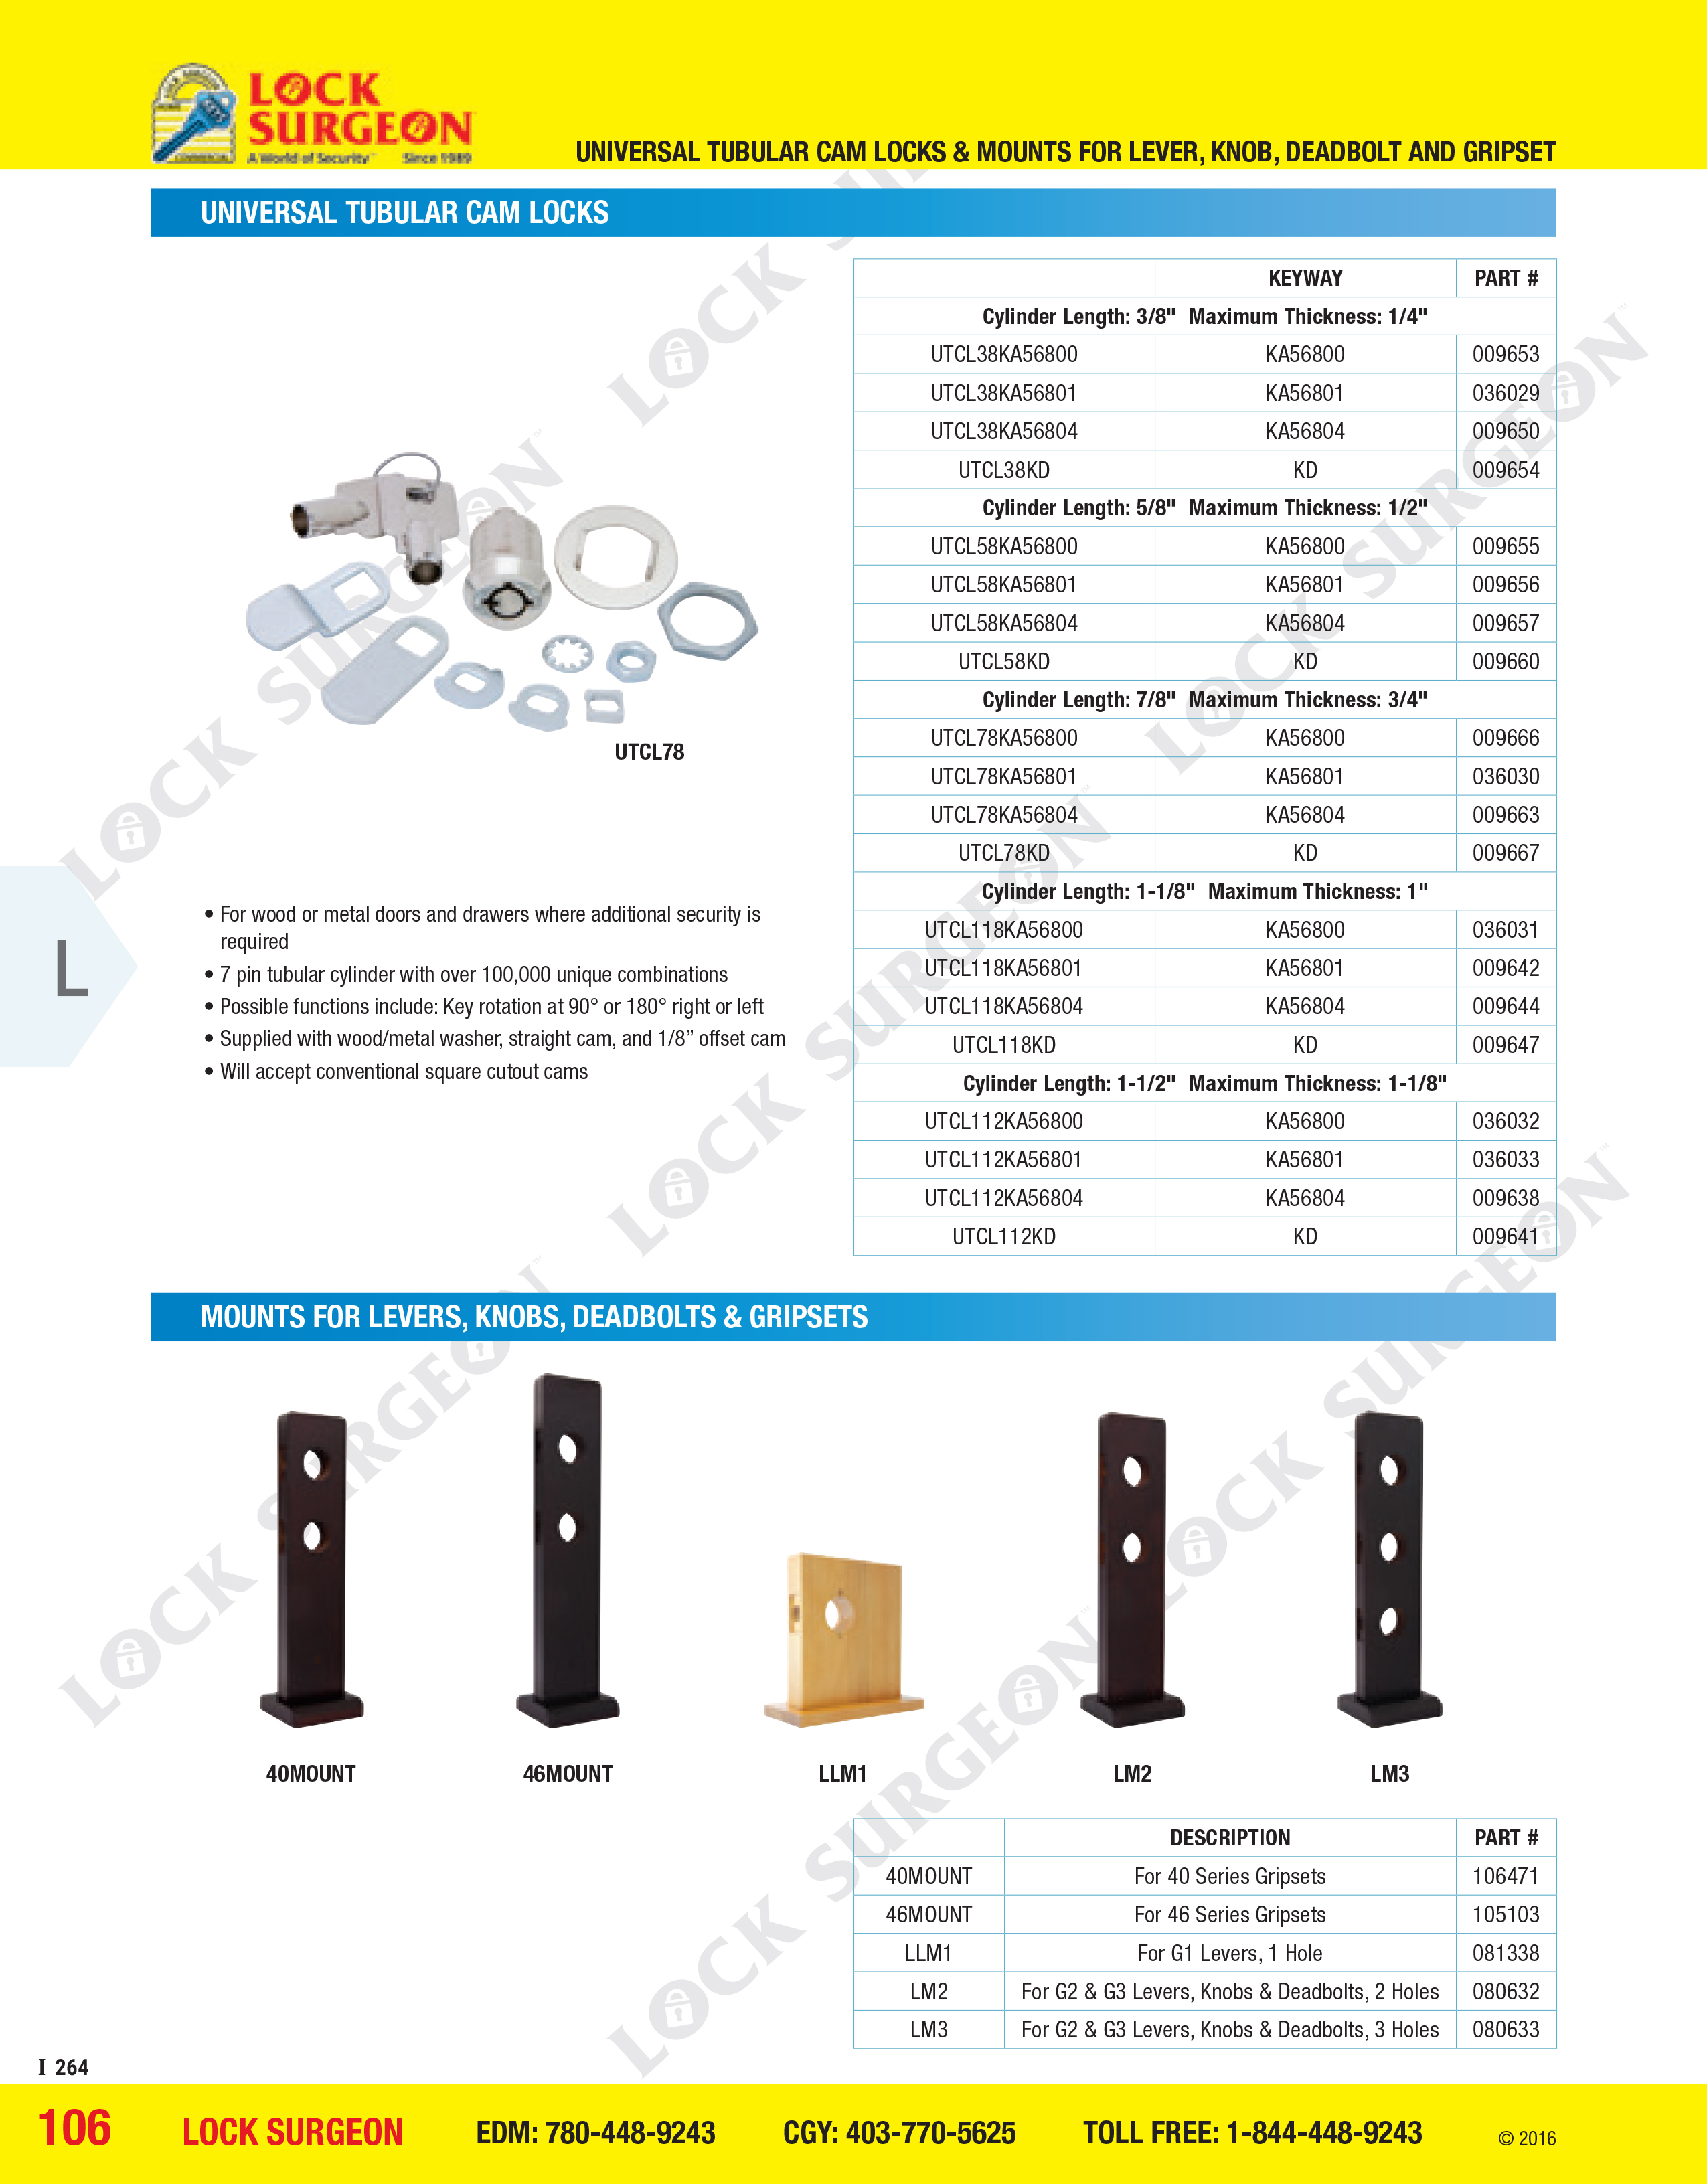 Universal tubular cam locks, mounts for levers, knobs, deadbolts and gripsets